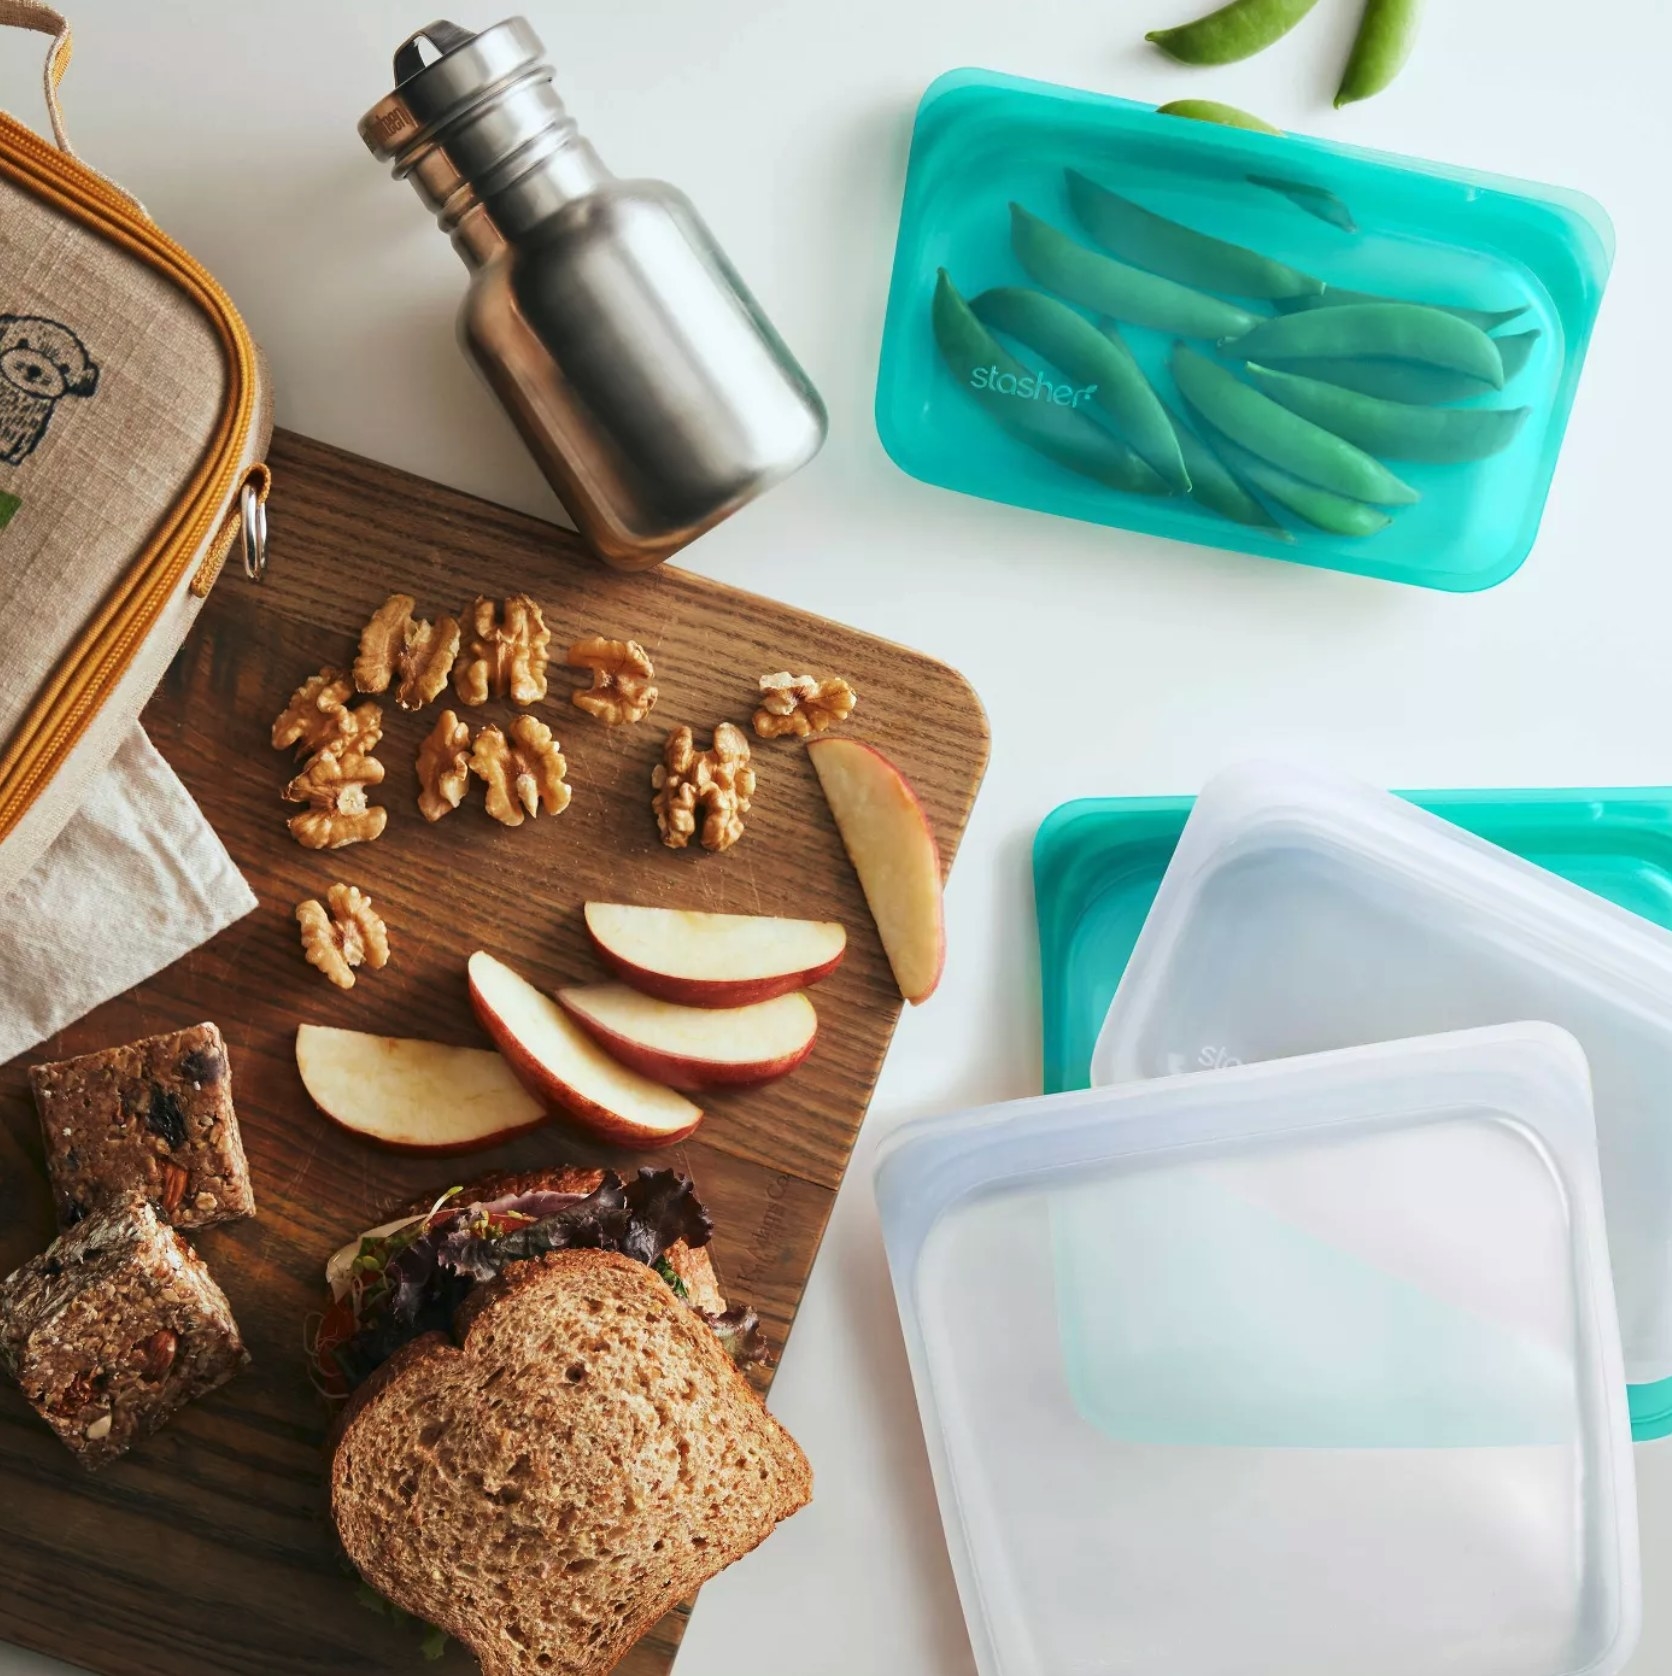 Three empty silicone bags and one silicone bag with edamame next to a chopping board with a sandwich, apple slices, walnuts, and a granola bar.